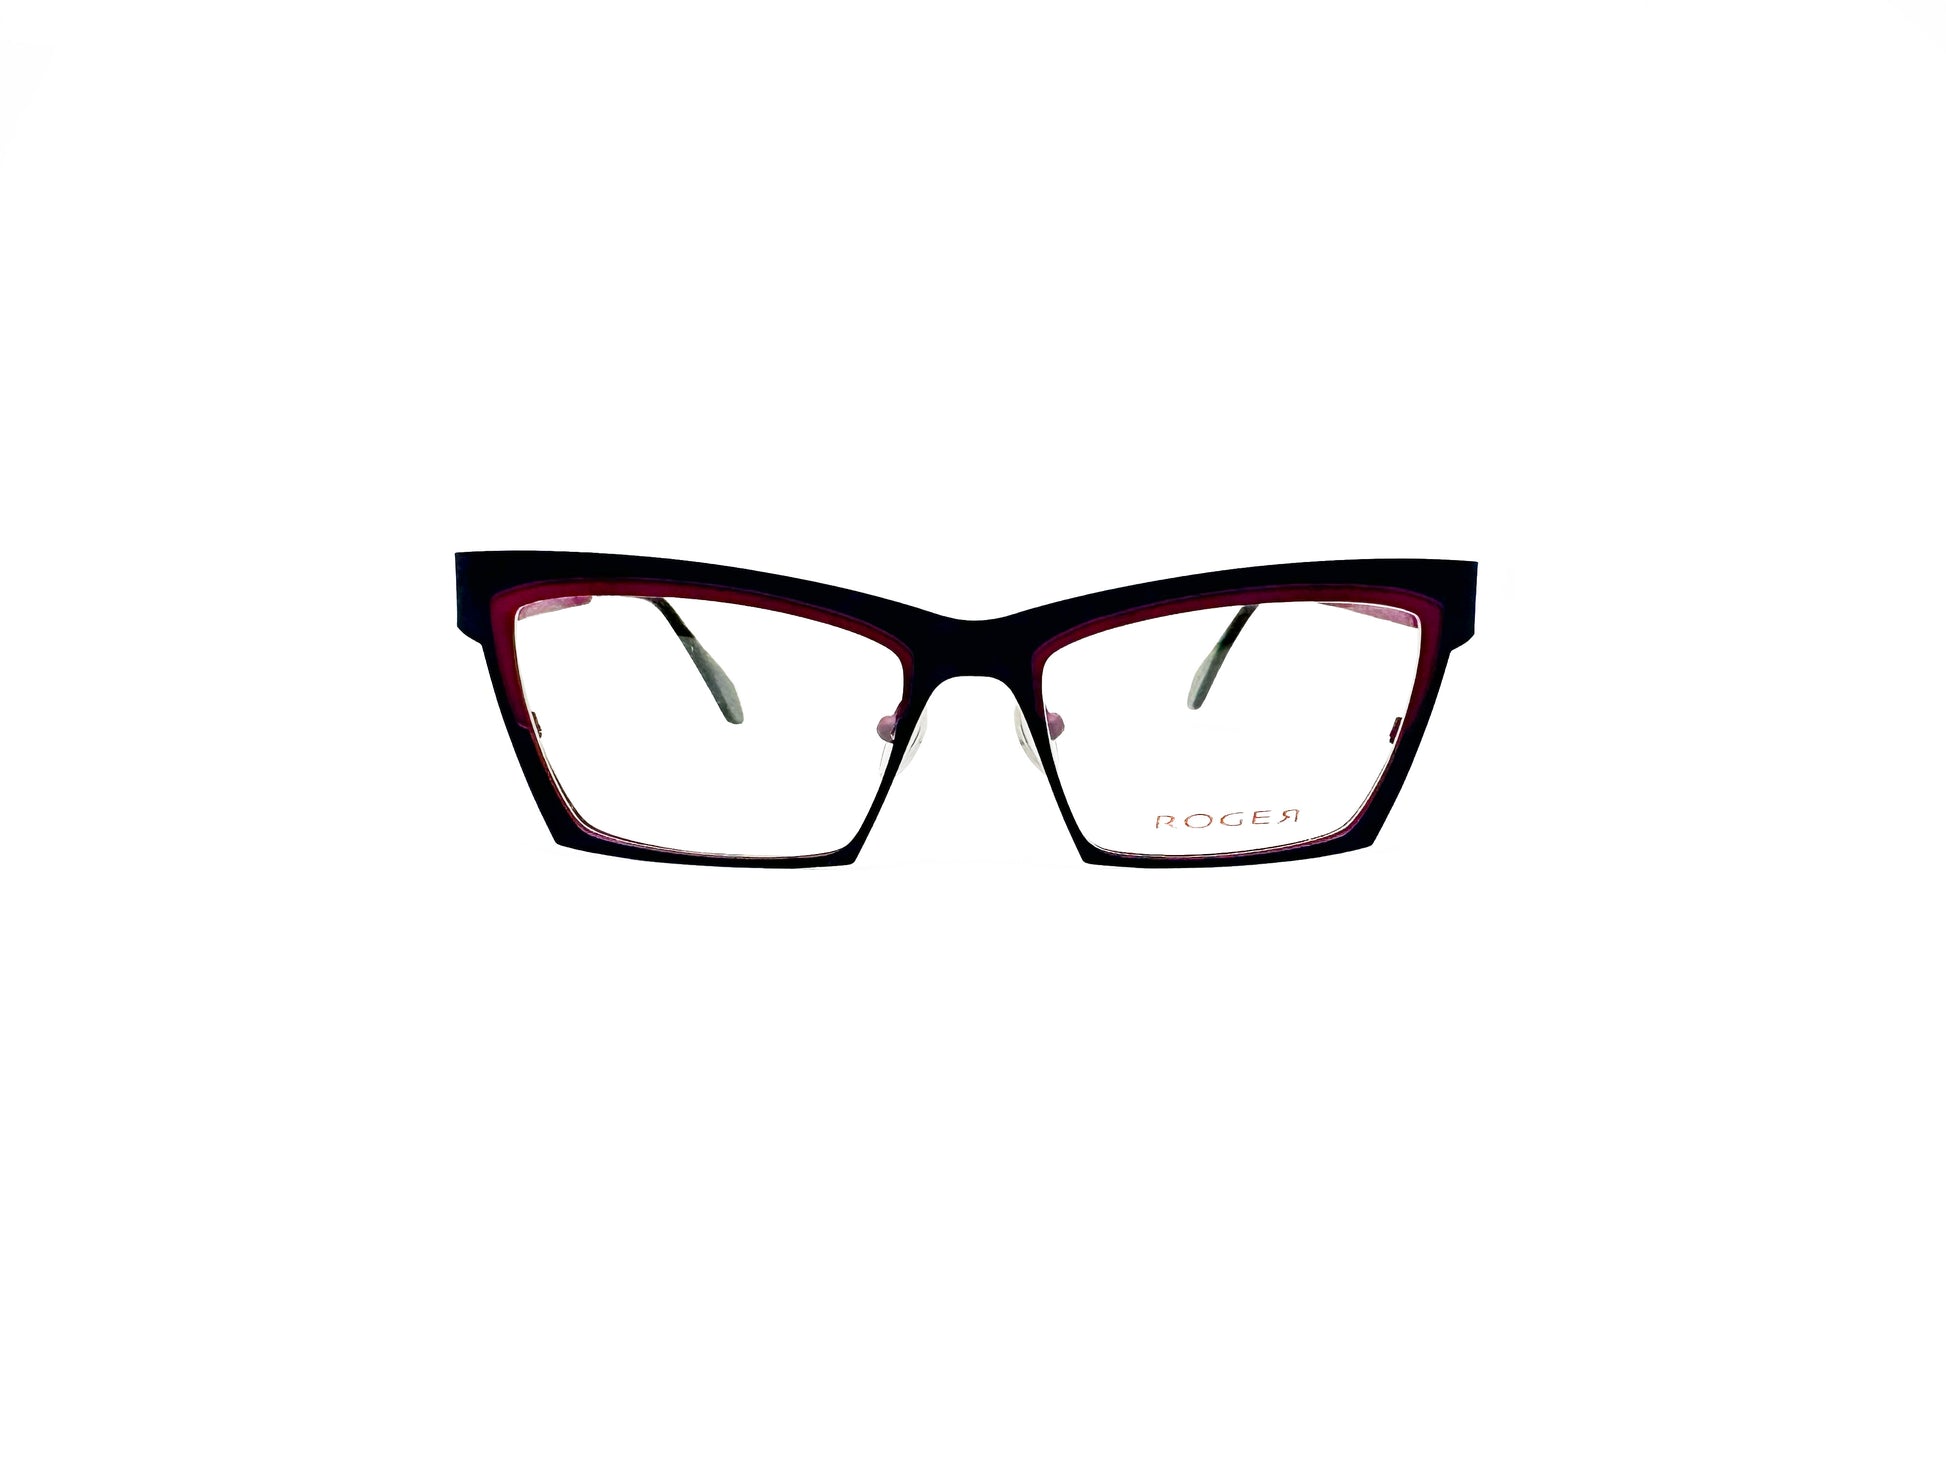 Roger metal, angled cat-eye optical frame. Model: Guzz. Color: 3 - Black with red inner trim. Front view. 